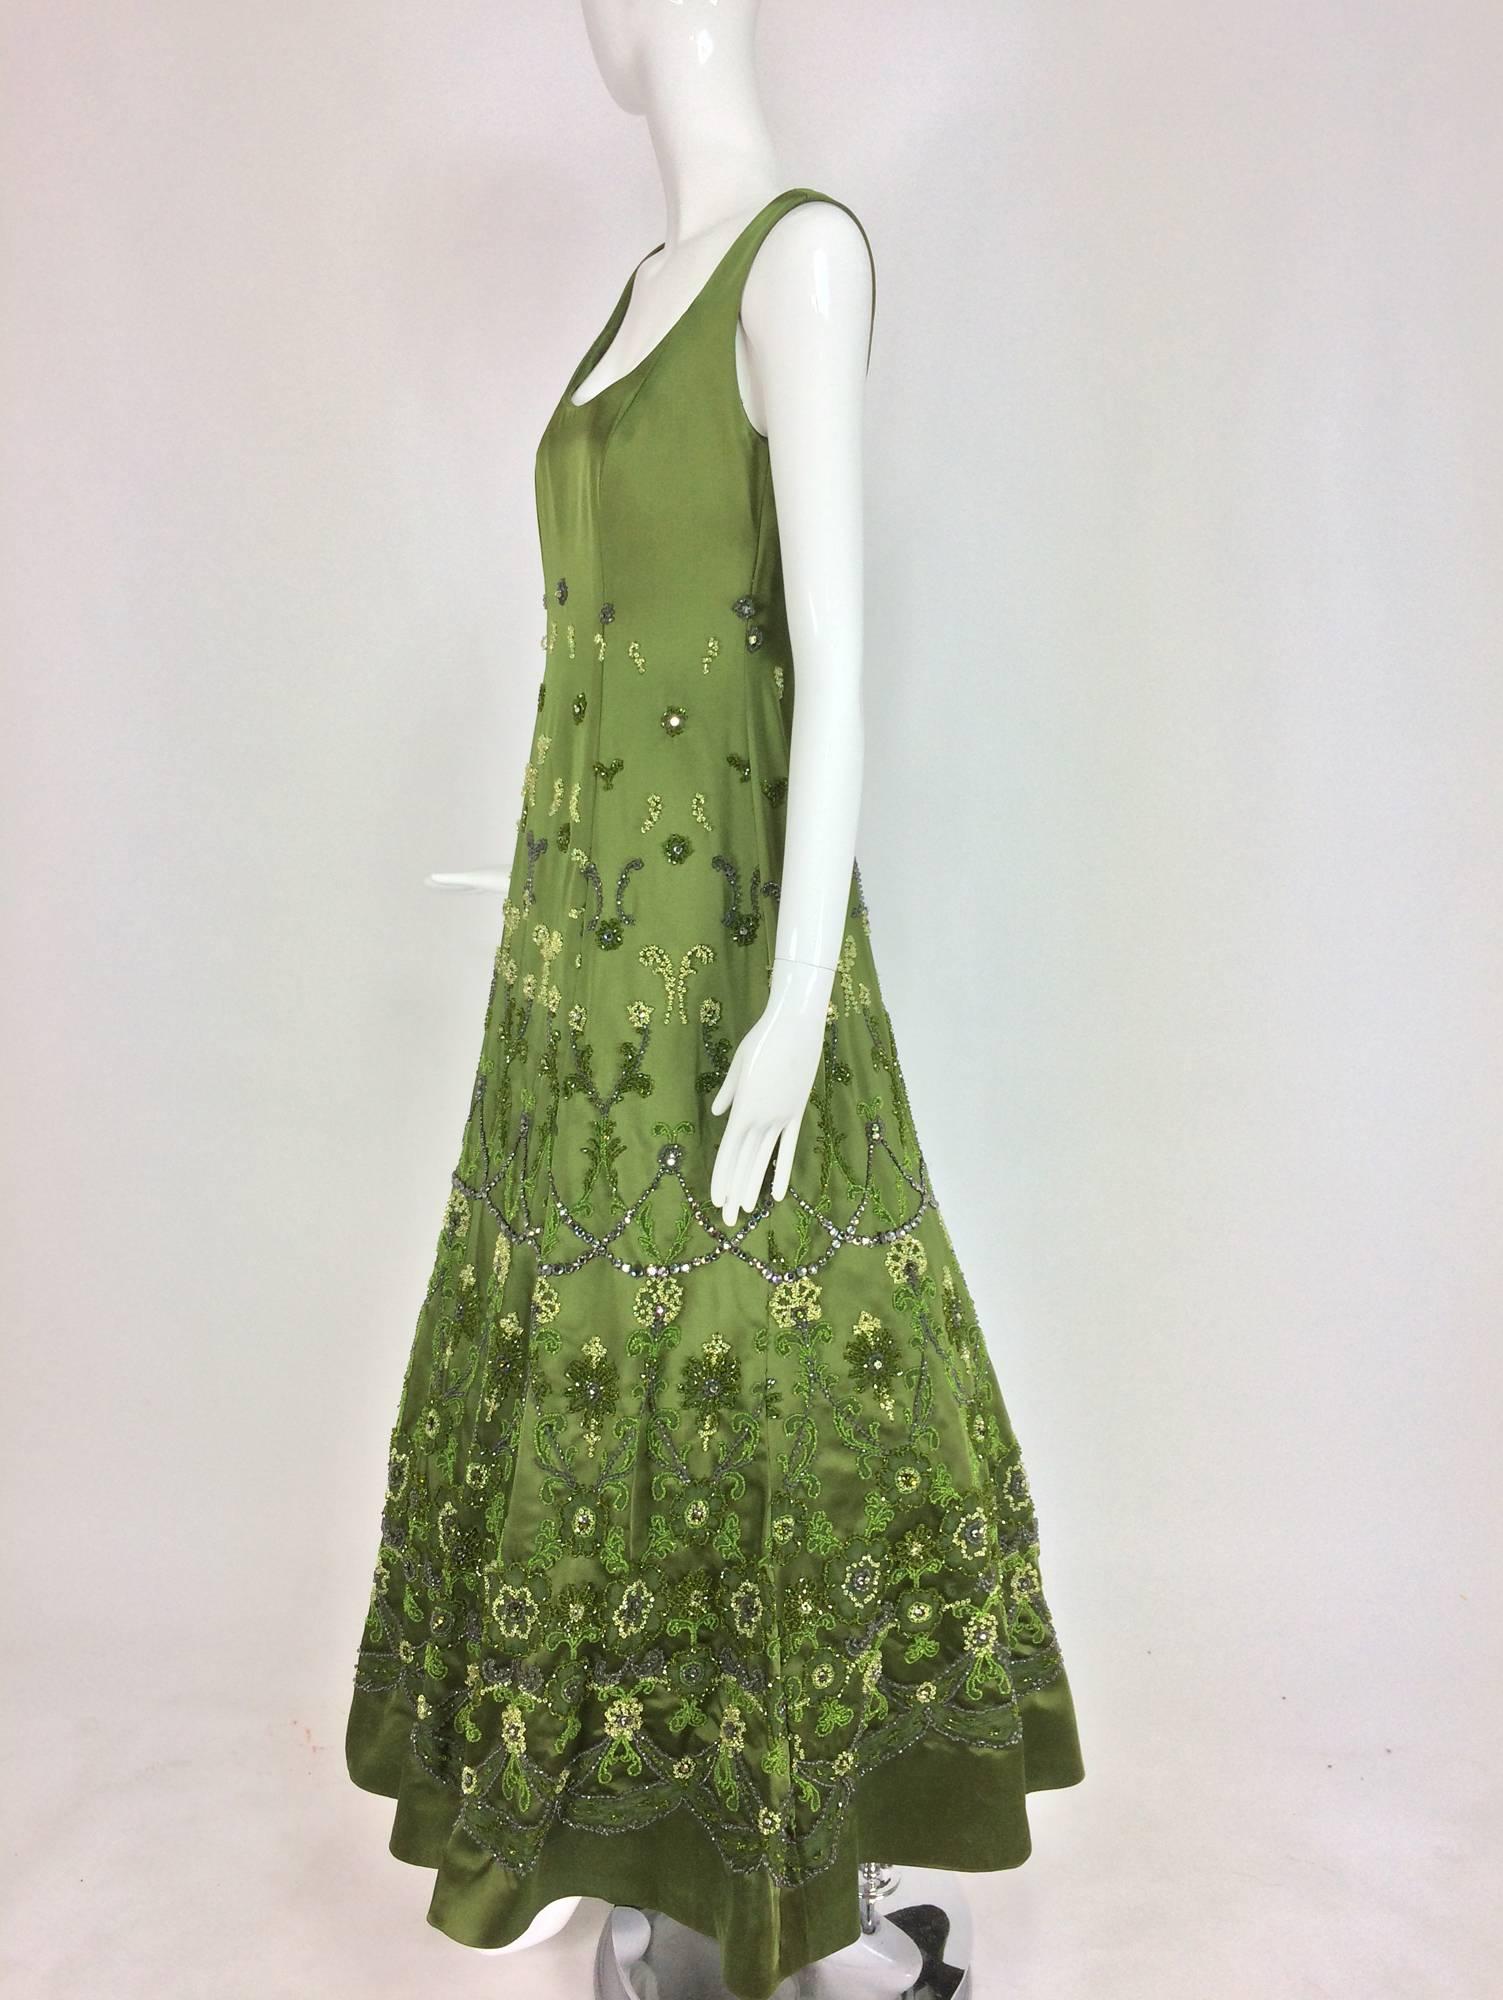 Randi Rahm green silk heavily hand beaded and rhinestone evening dress. A beautiful one of a kind evening dress in forest green heavy silk, heavily hand beaded with sparkling crystal beads and prong set rhinestones. This would make a lovely mother